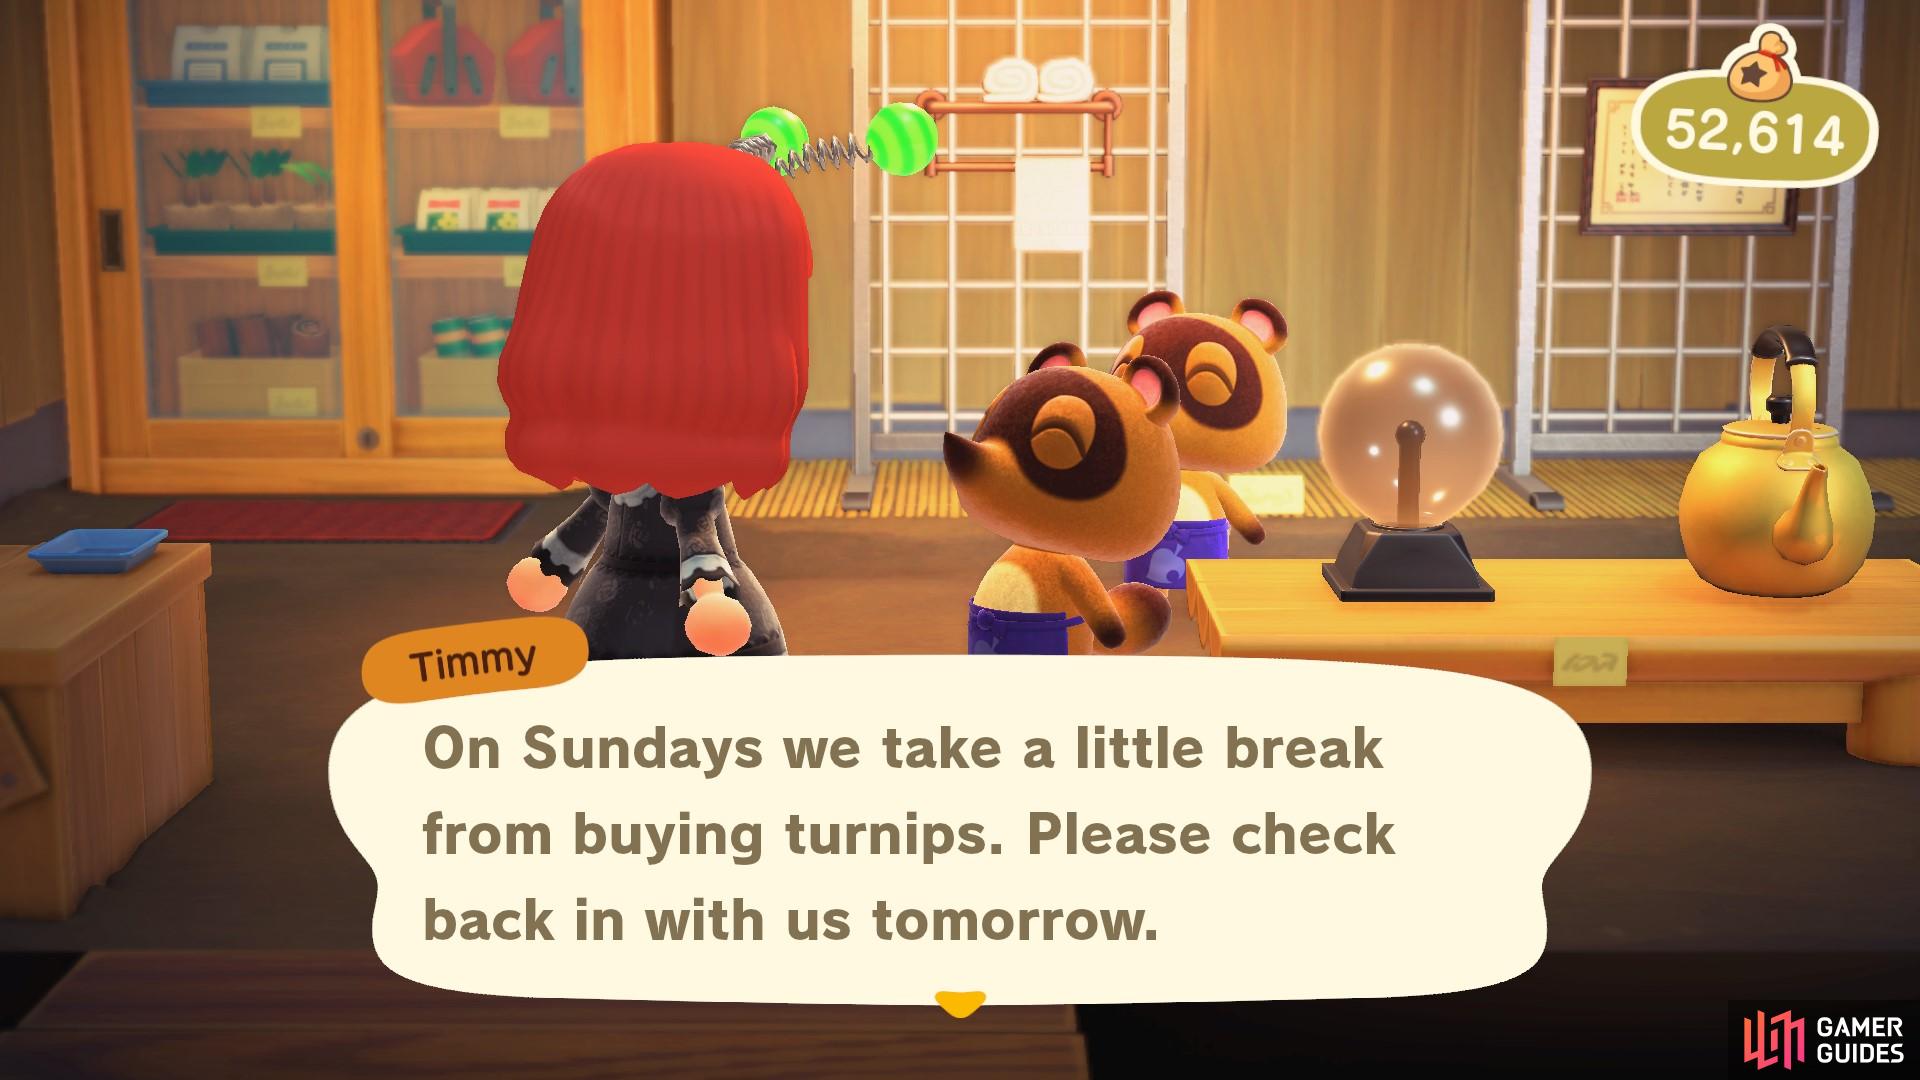 You can't sell turnips on Sundays. 